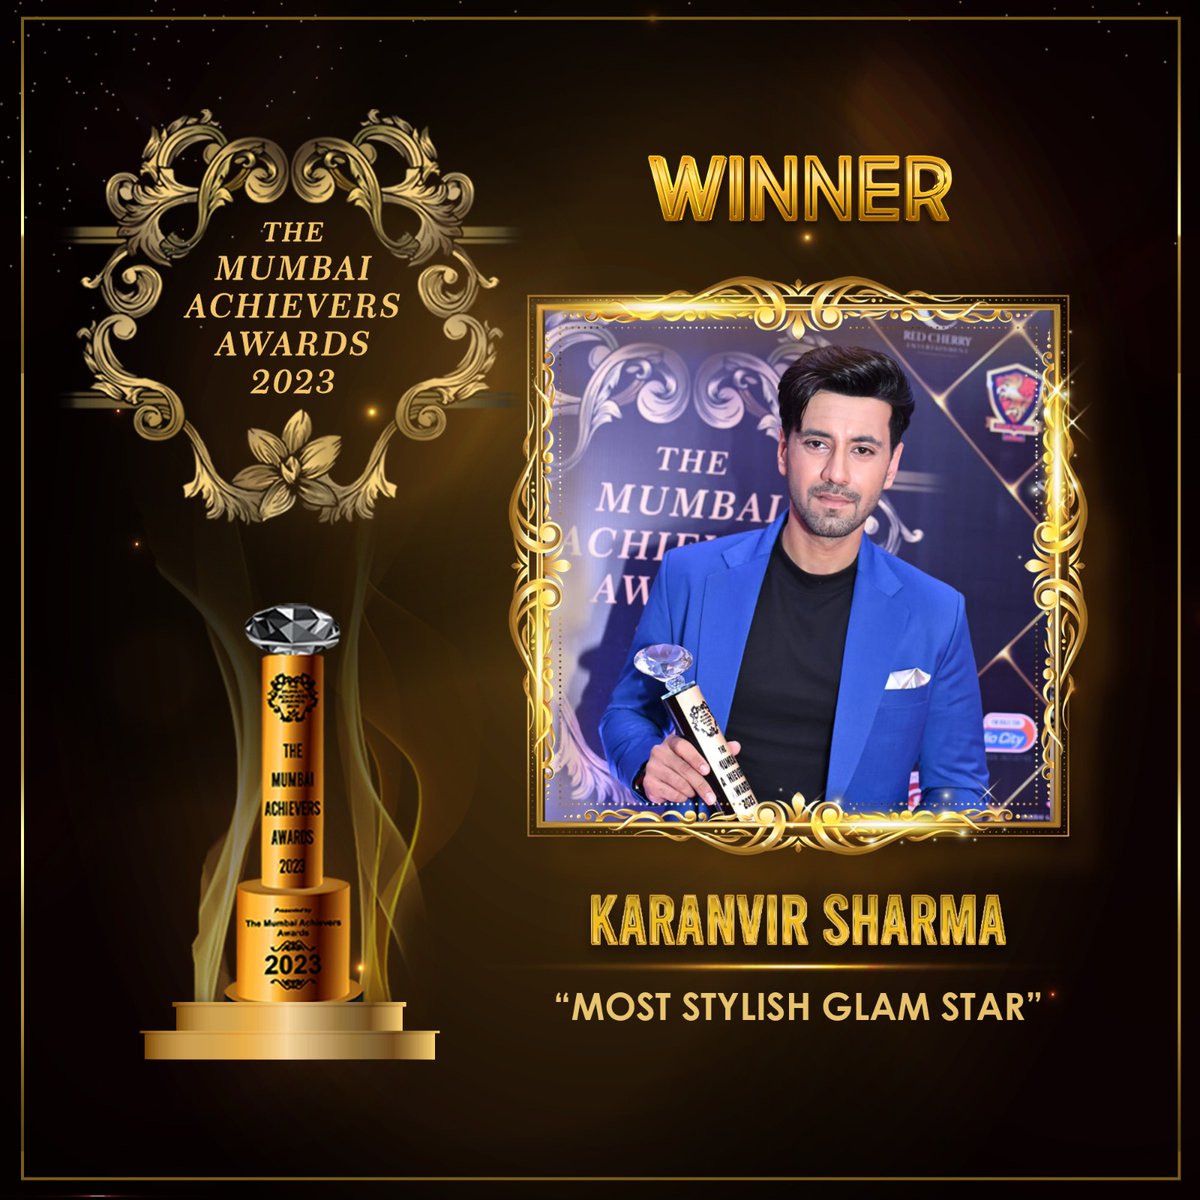 The MUMBAI ACHIEVERS AWARDS 2023
Congratulations to @karanvirsharma9
'The Mumbai Achievers Awards' congratulate you for winning the prestigious award in the respective category - 'Most Stylish Glam Star'

Wish you the best for your future endeavours!

#MumbaiAchieversAwards2023